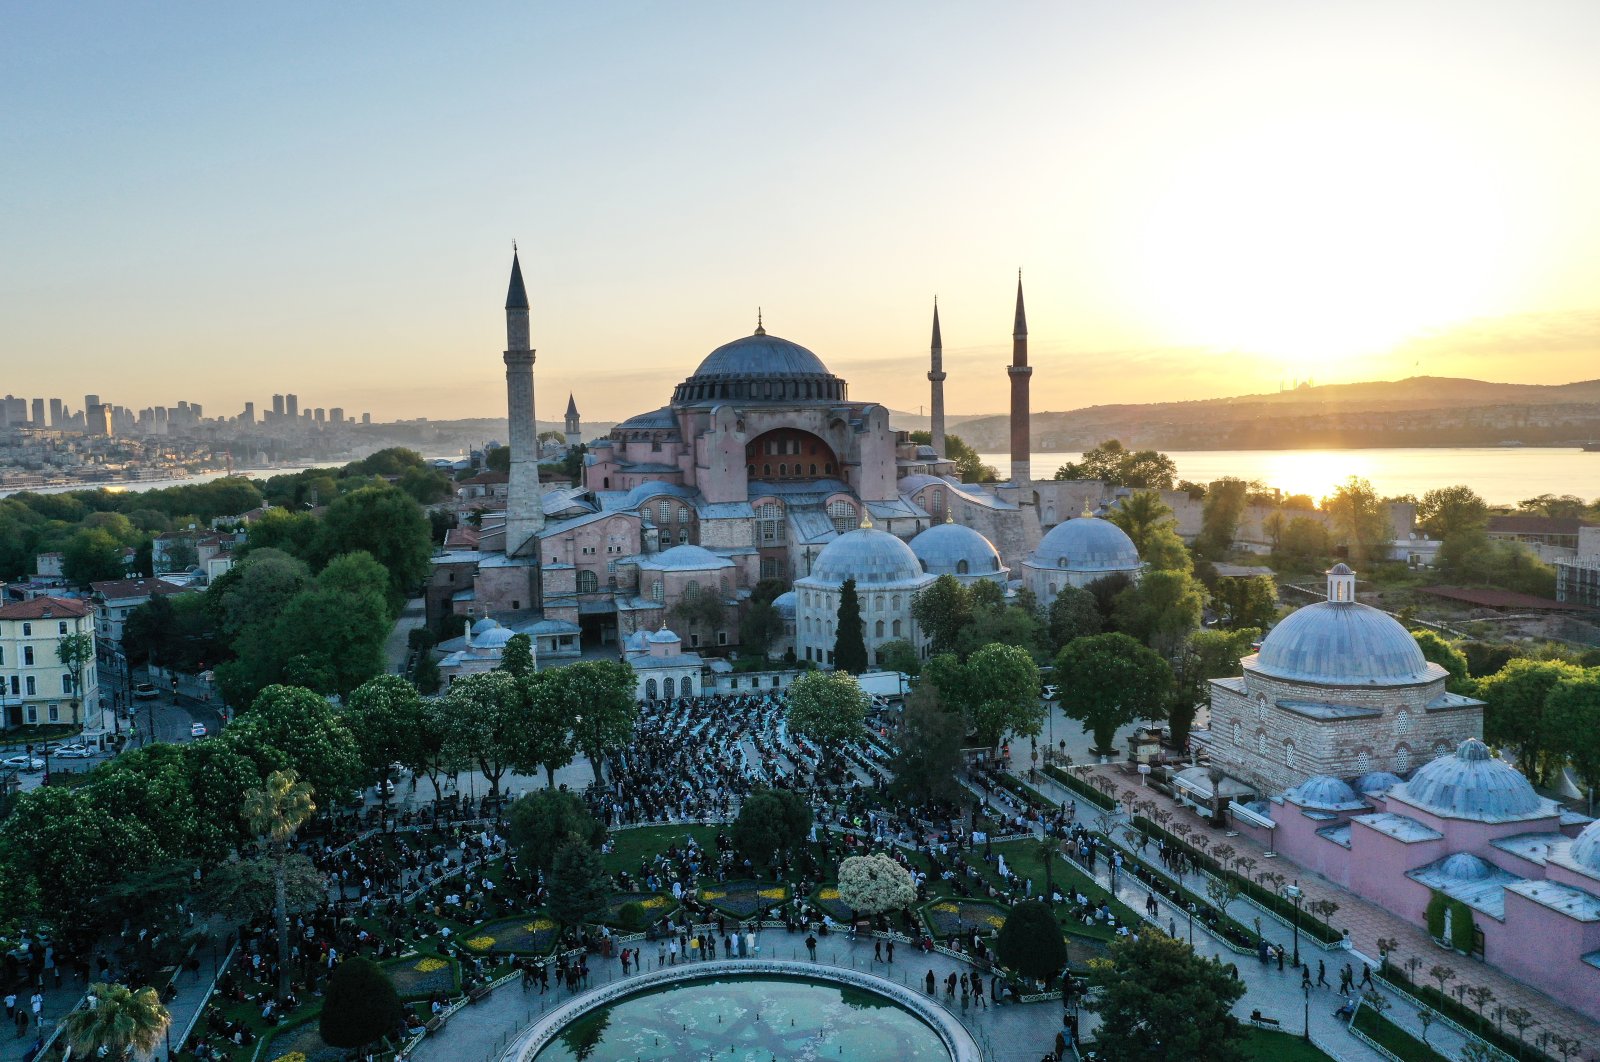 Over 10 million tourists visit Istanbul in 8 months